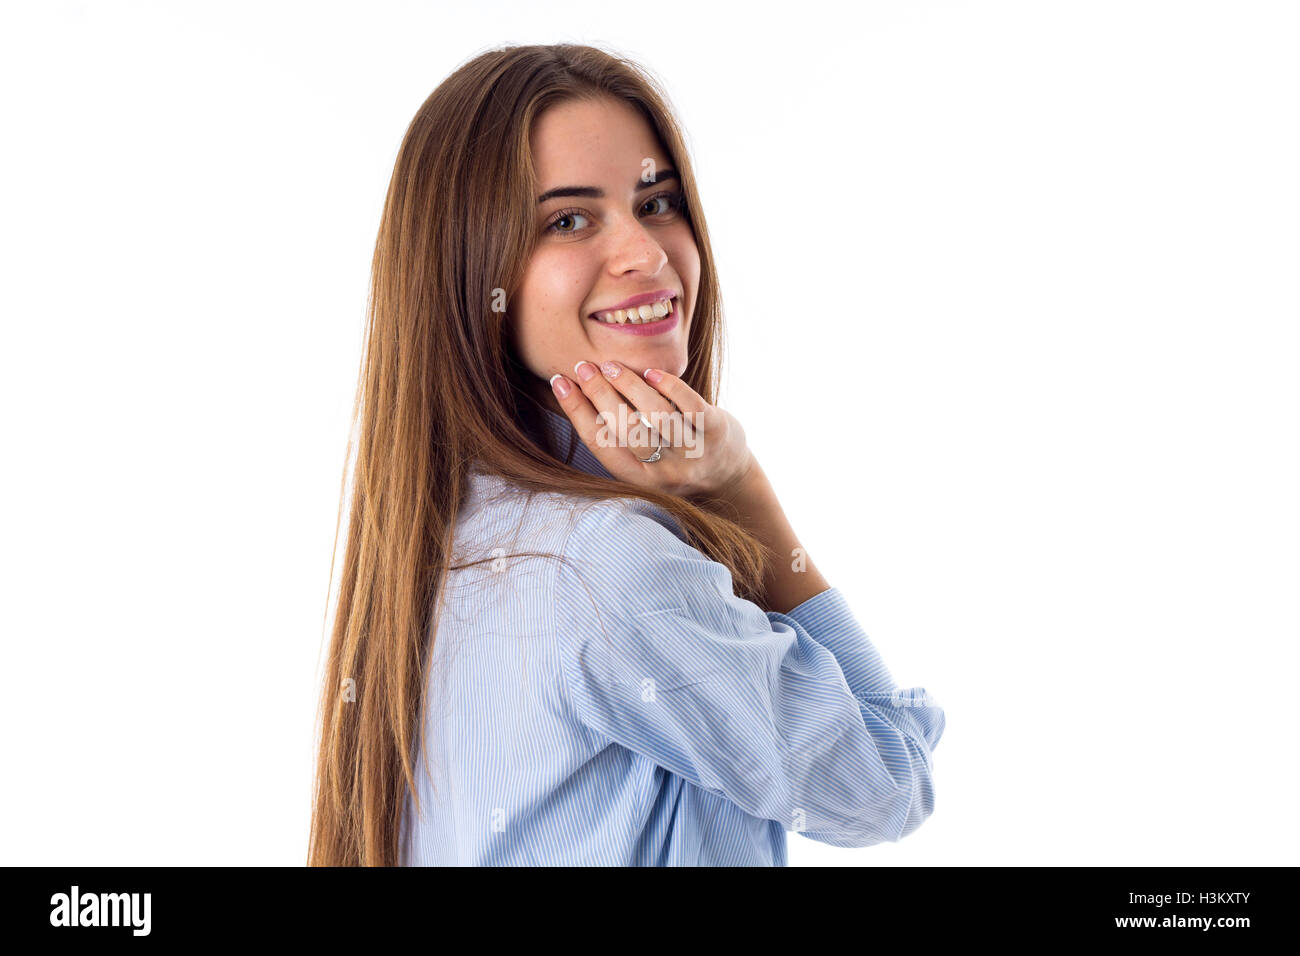 Smiling woman touching face Stock Photo